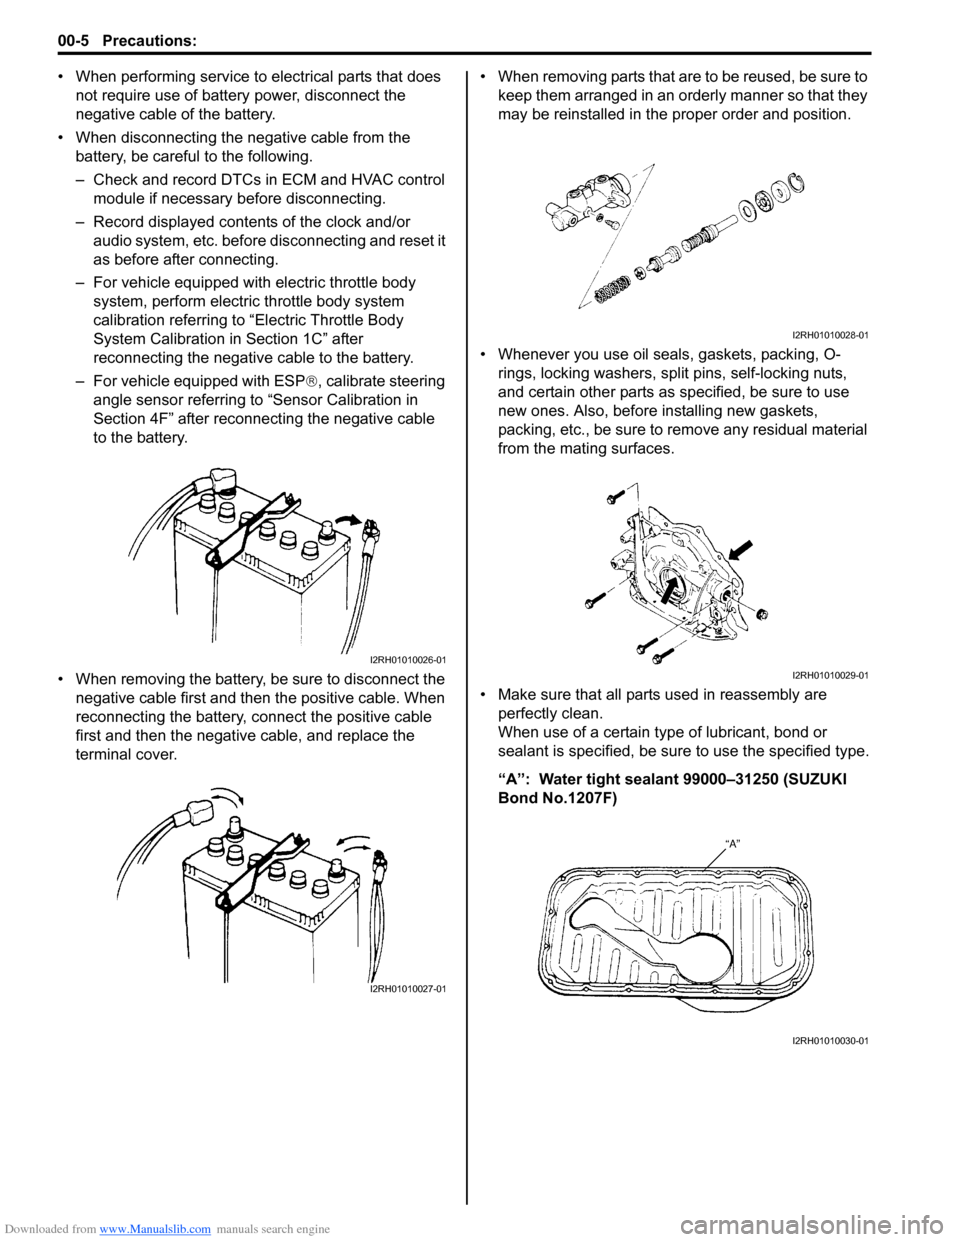 SUZUKI SWIFT 2004 2.G Service Workshop Manual Downloaded from www.Manualslib.com manuals search engine 00-5 Precautions: 
• When performing service to electrical parts that does not require use of battery power, disconnect the 
negative cable o